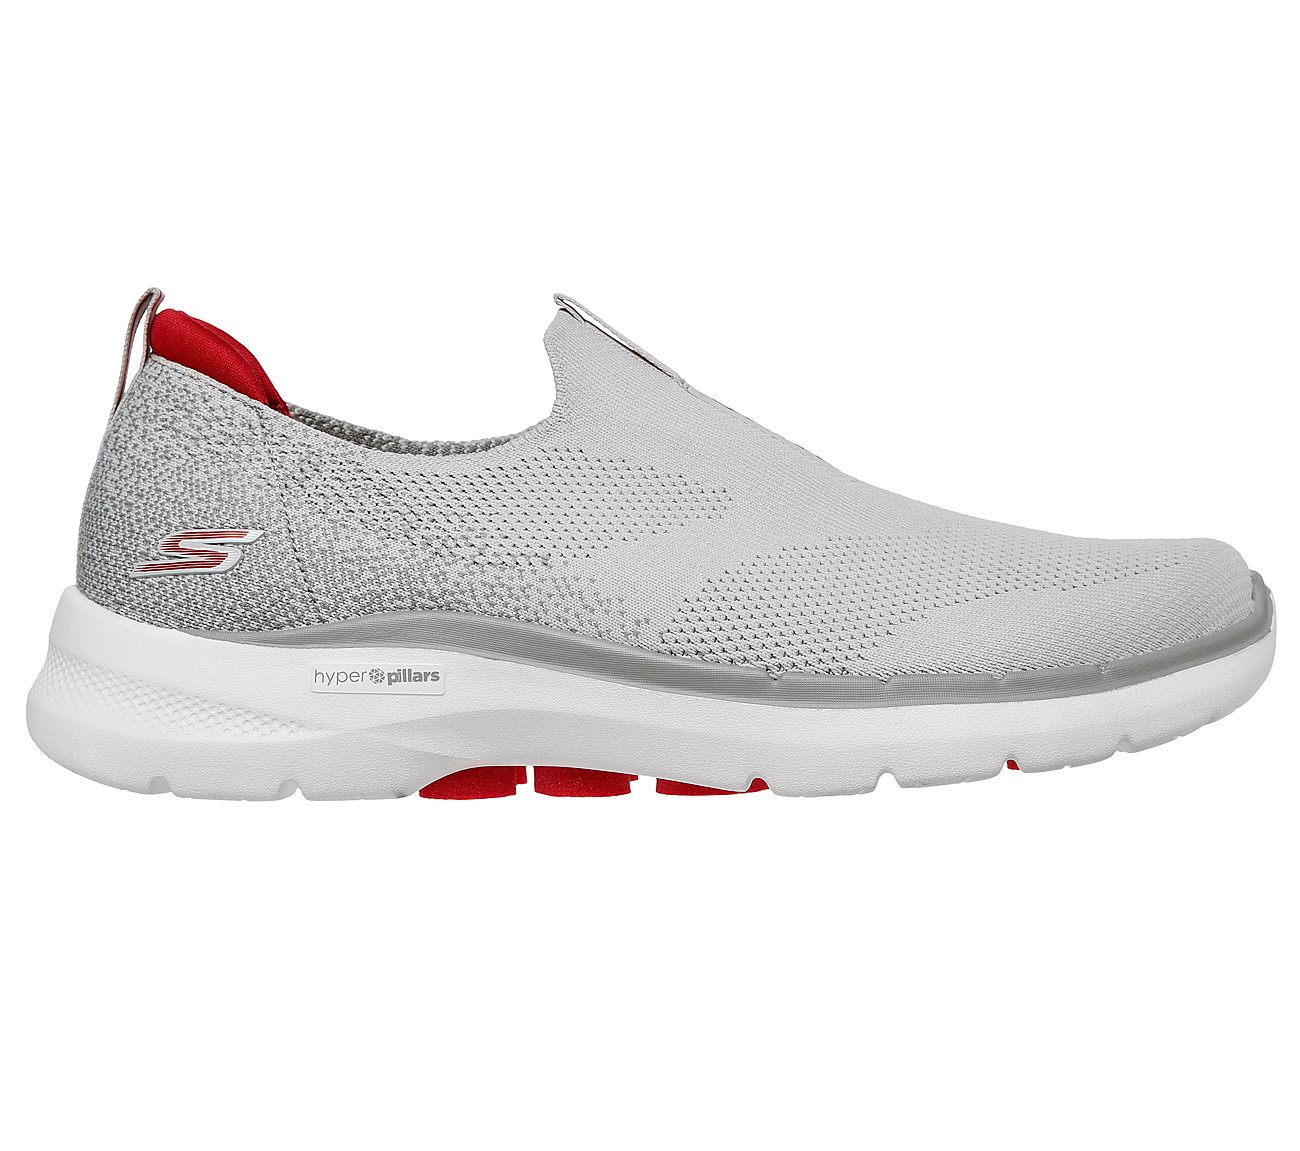 Skechers Grey/Red Go Walk 6 Mens Slip On Shoes - Style ID: 216202 | India